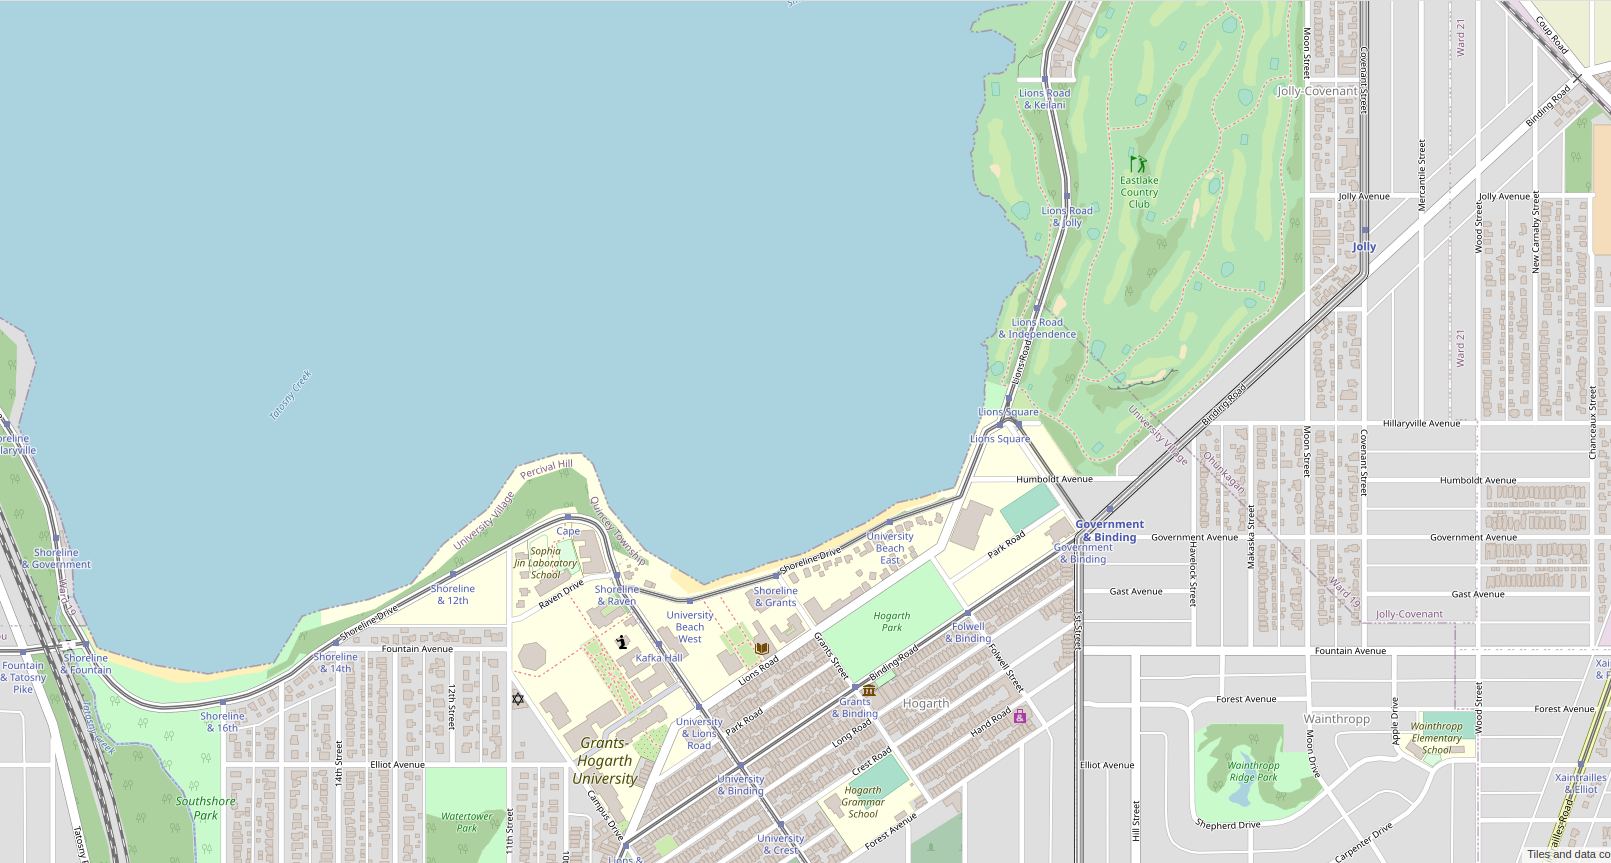 Screenshot of the map window on the OpenGeofiction site, showing an area mapped of an area around a lakeshore with lots of detail, including a university campus and a golf course